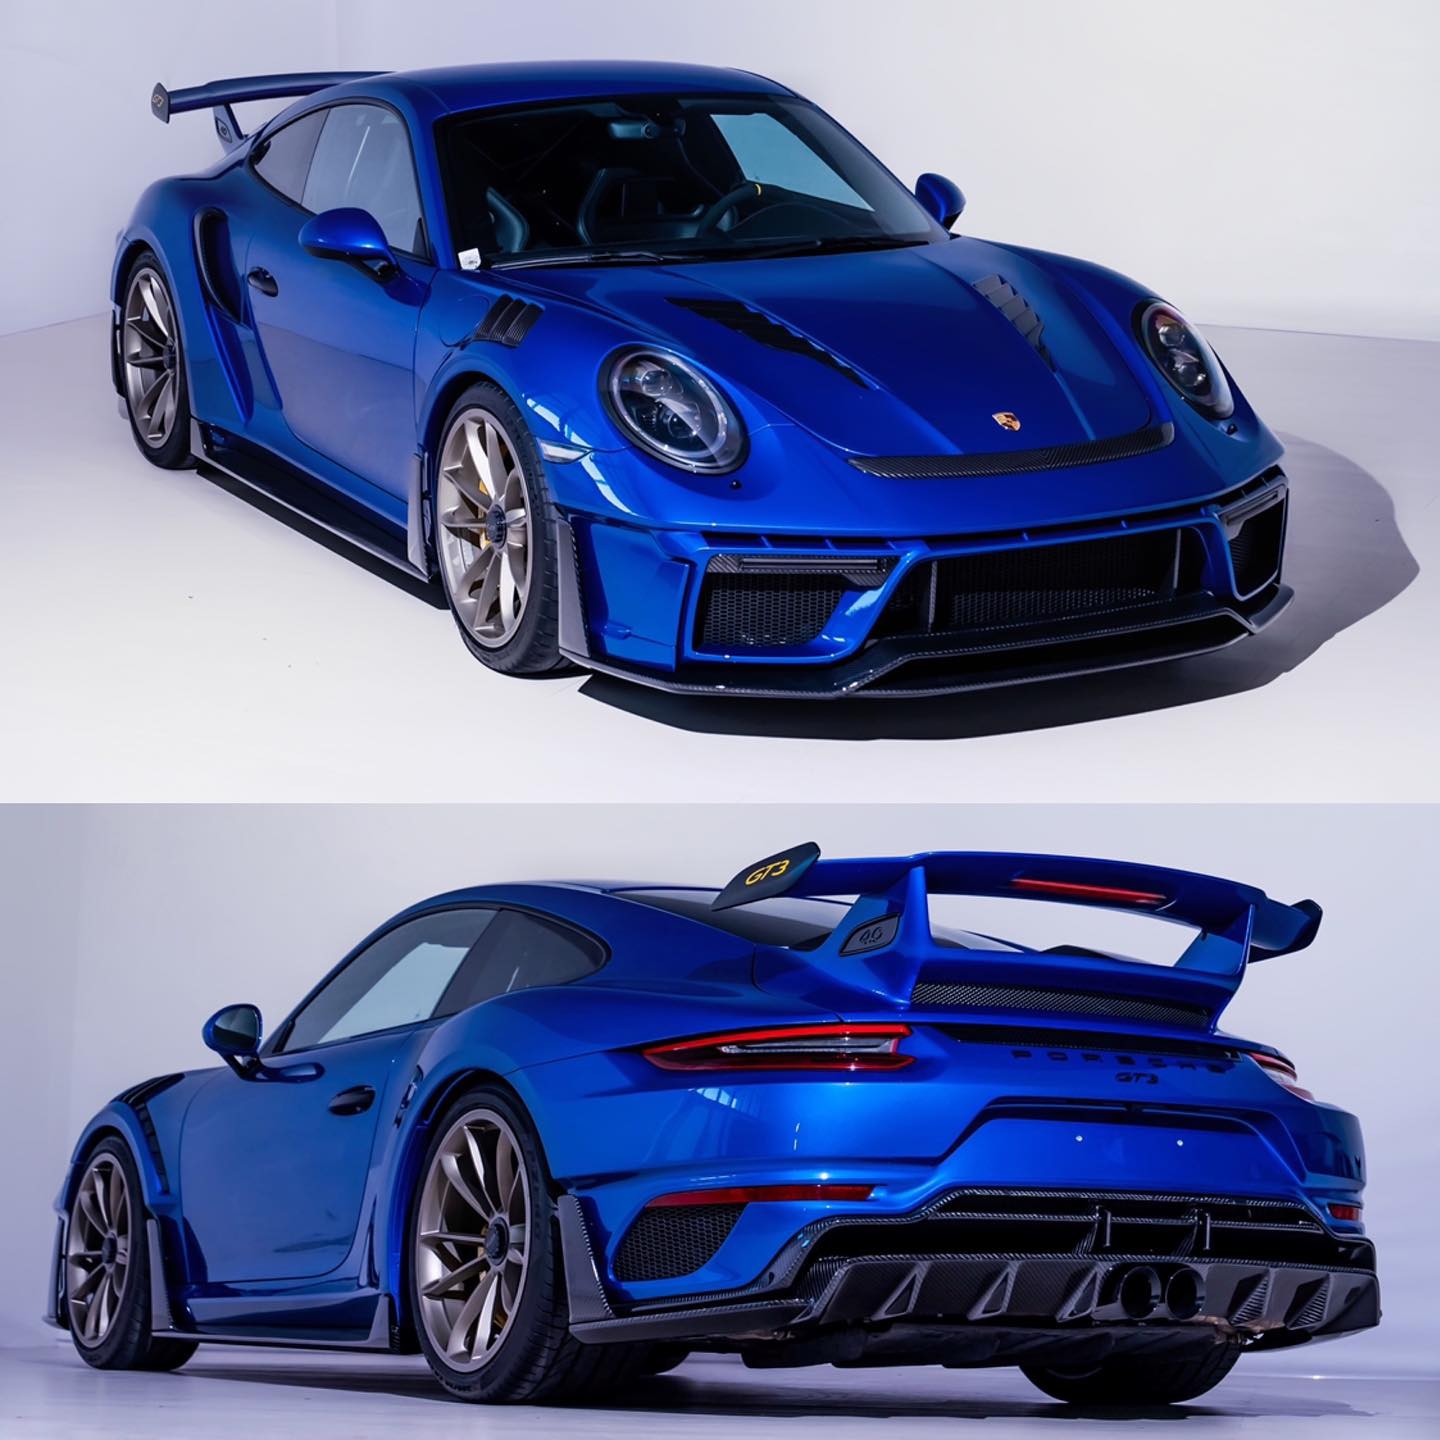 Check our price and buy a SCL Performance body kit for Porsche 911 GT3 Virus